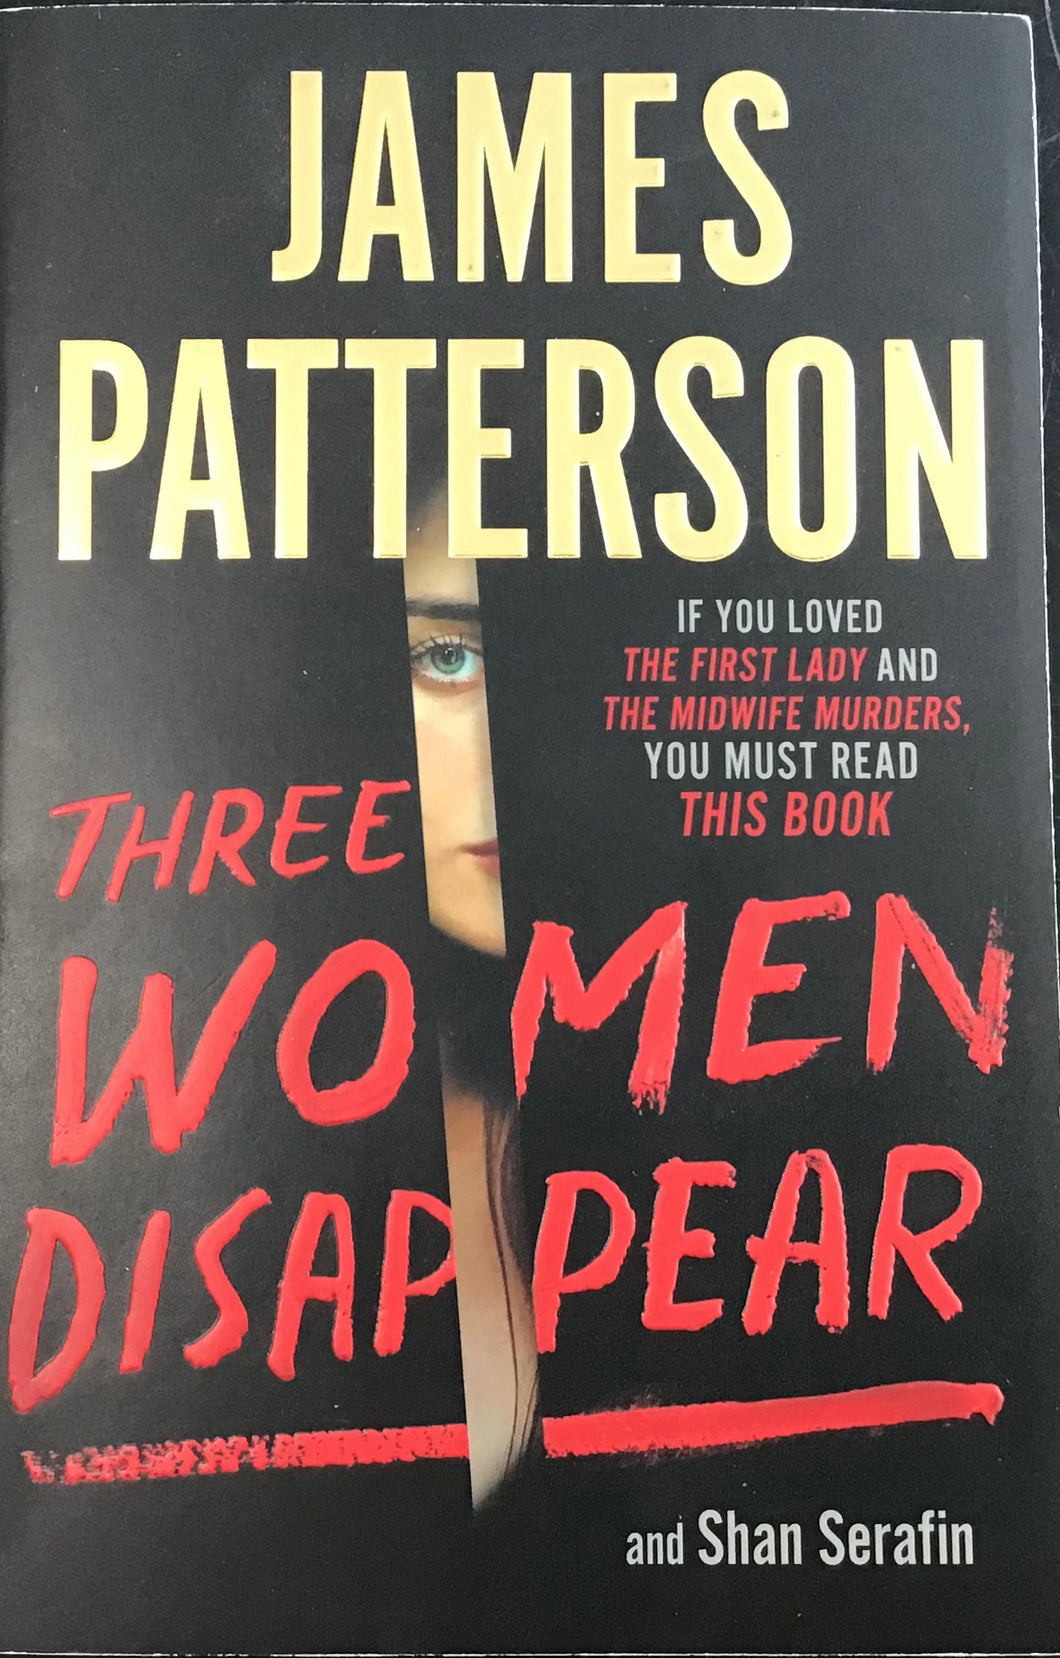 Three Women Disappear- James Patterson